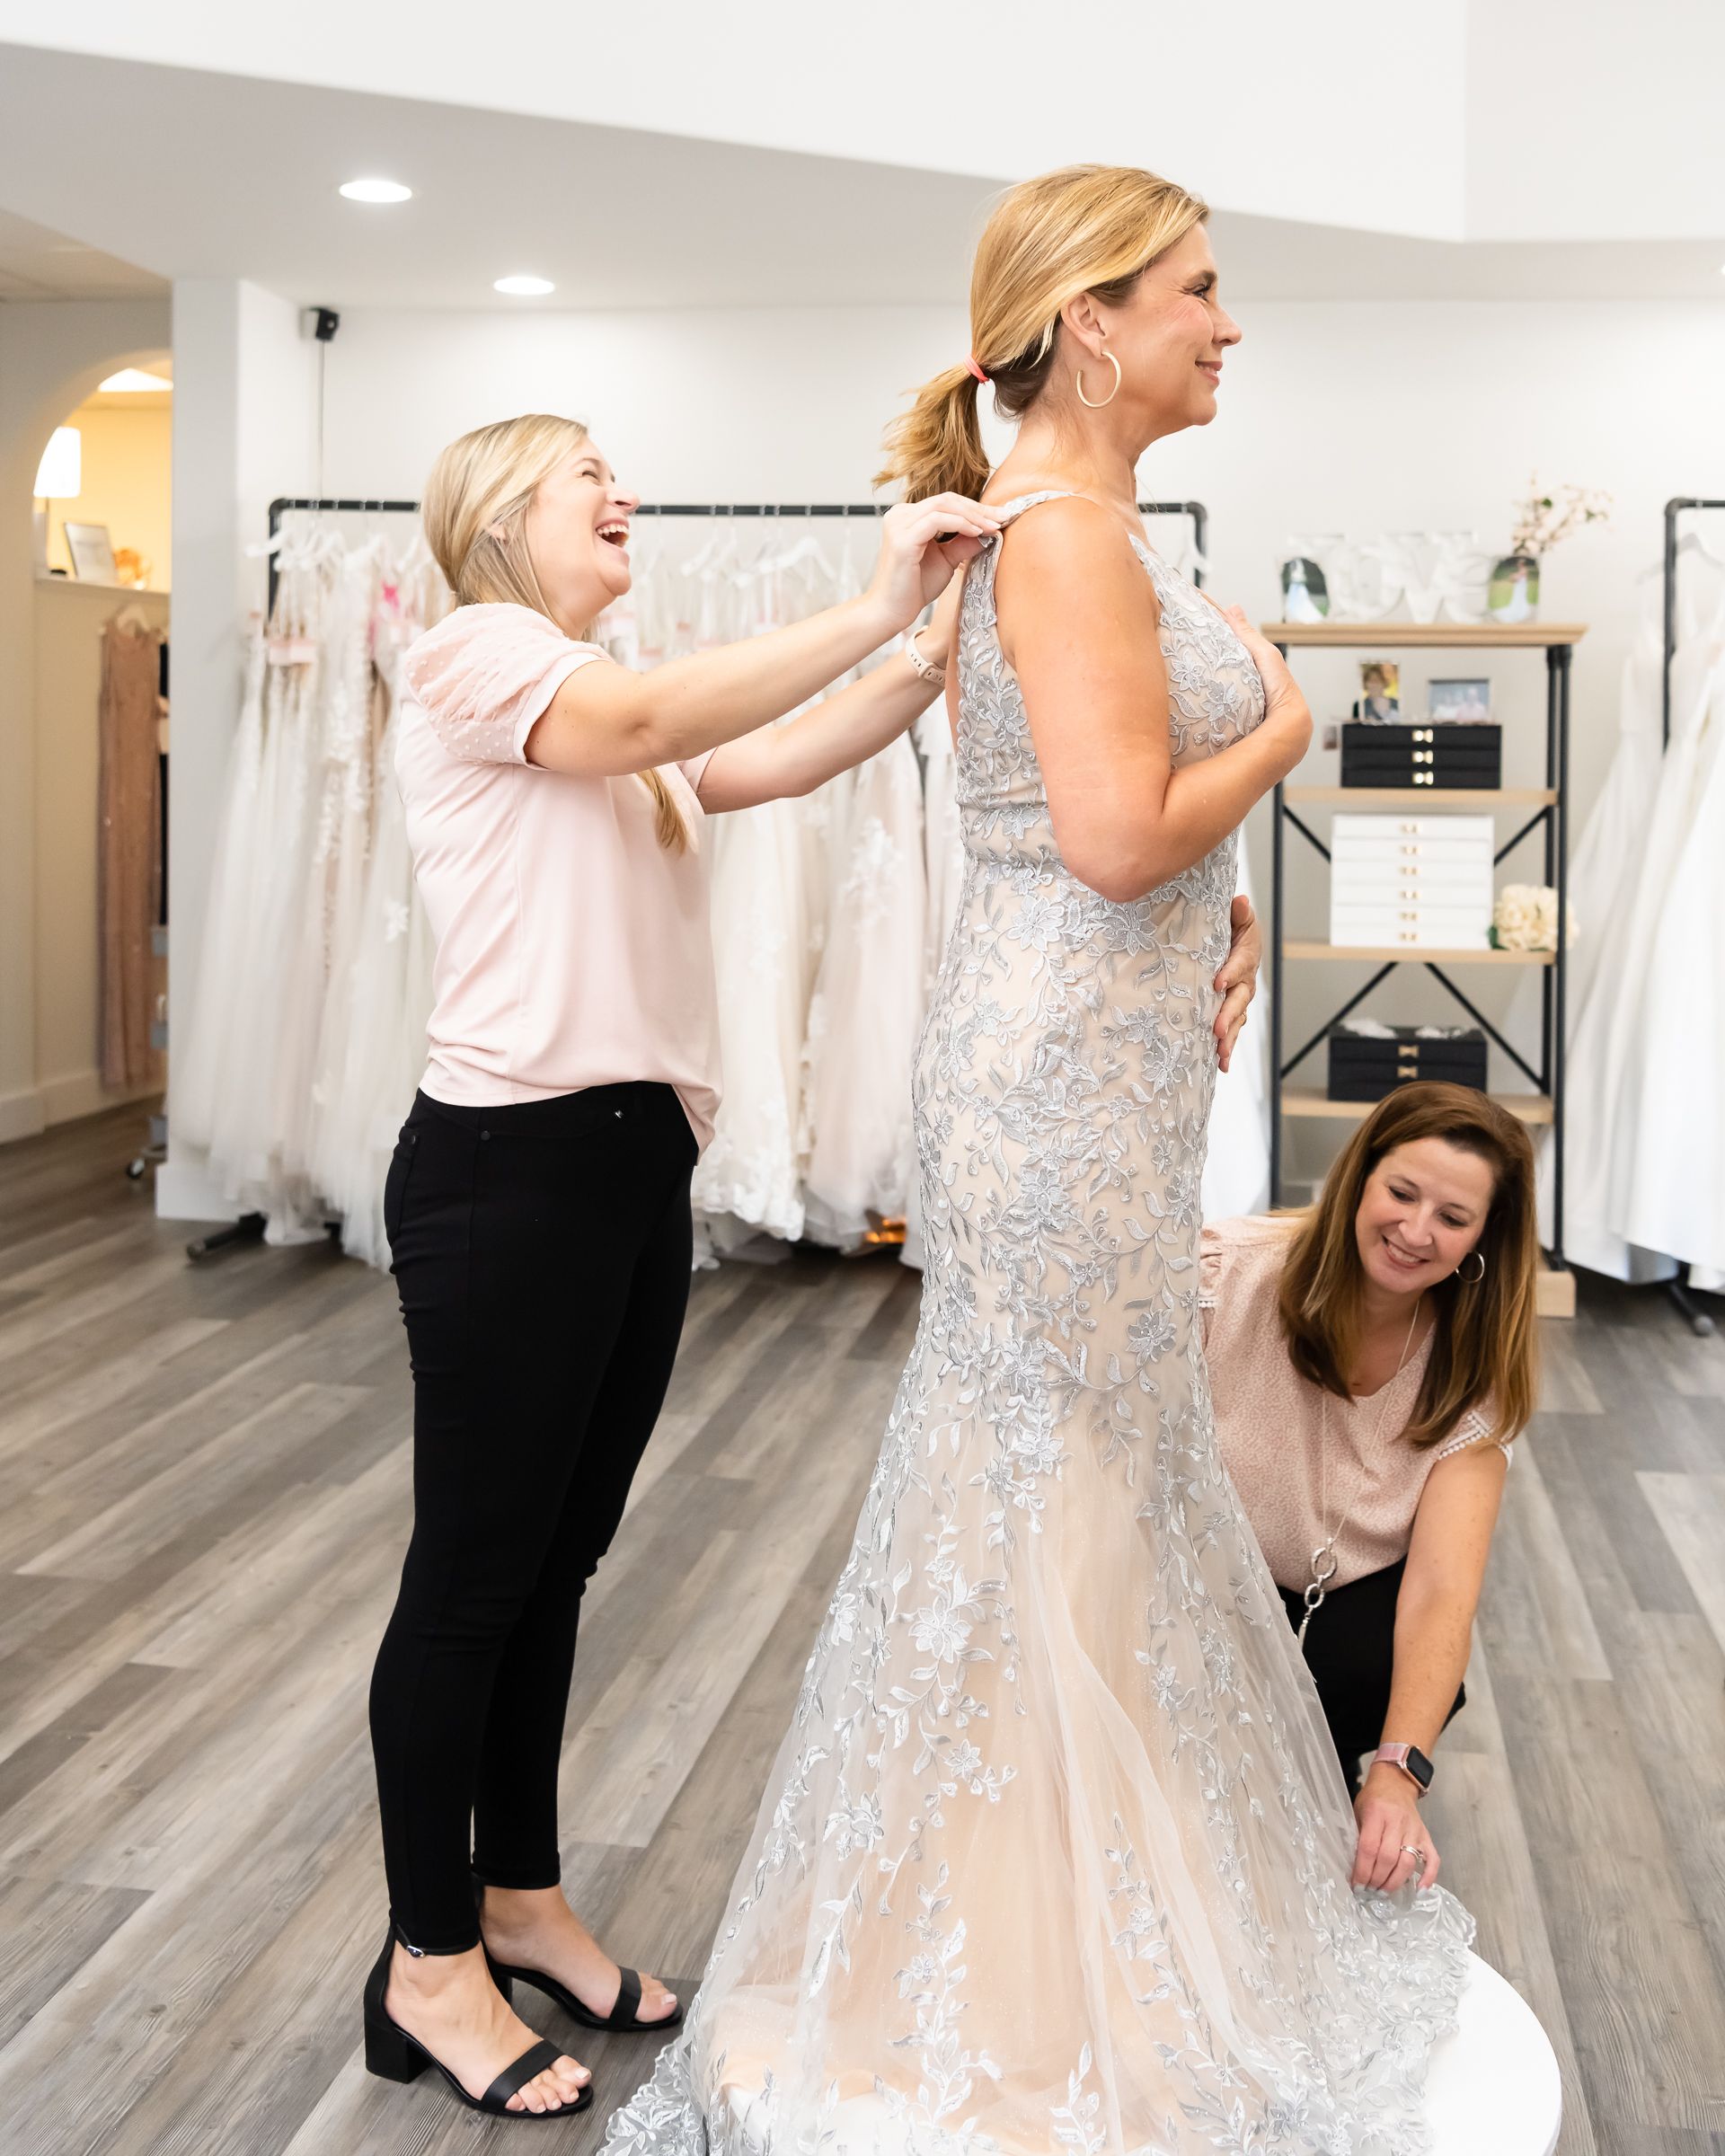 Mary Beth helps a mother of the bride try on a dress.